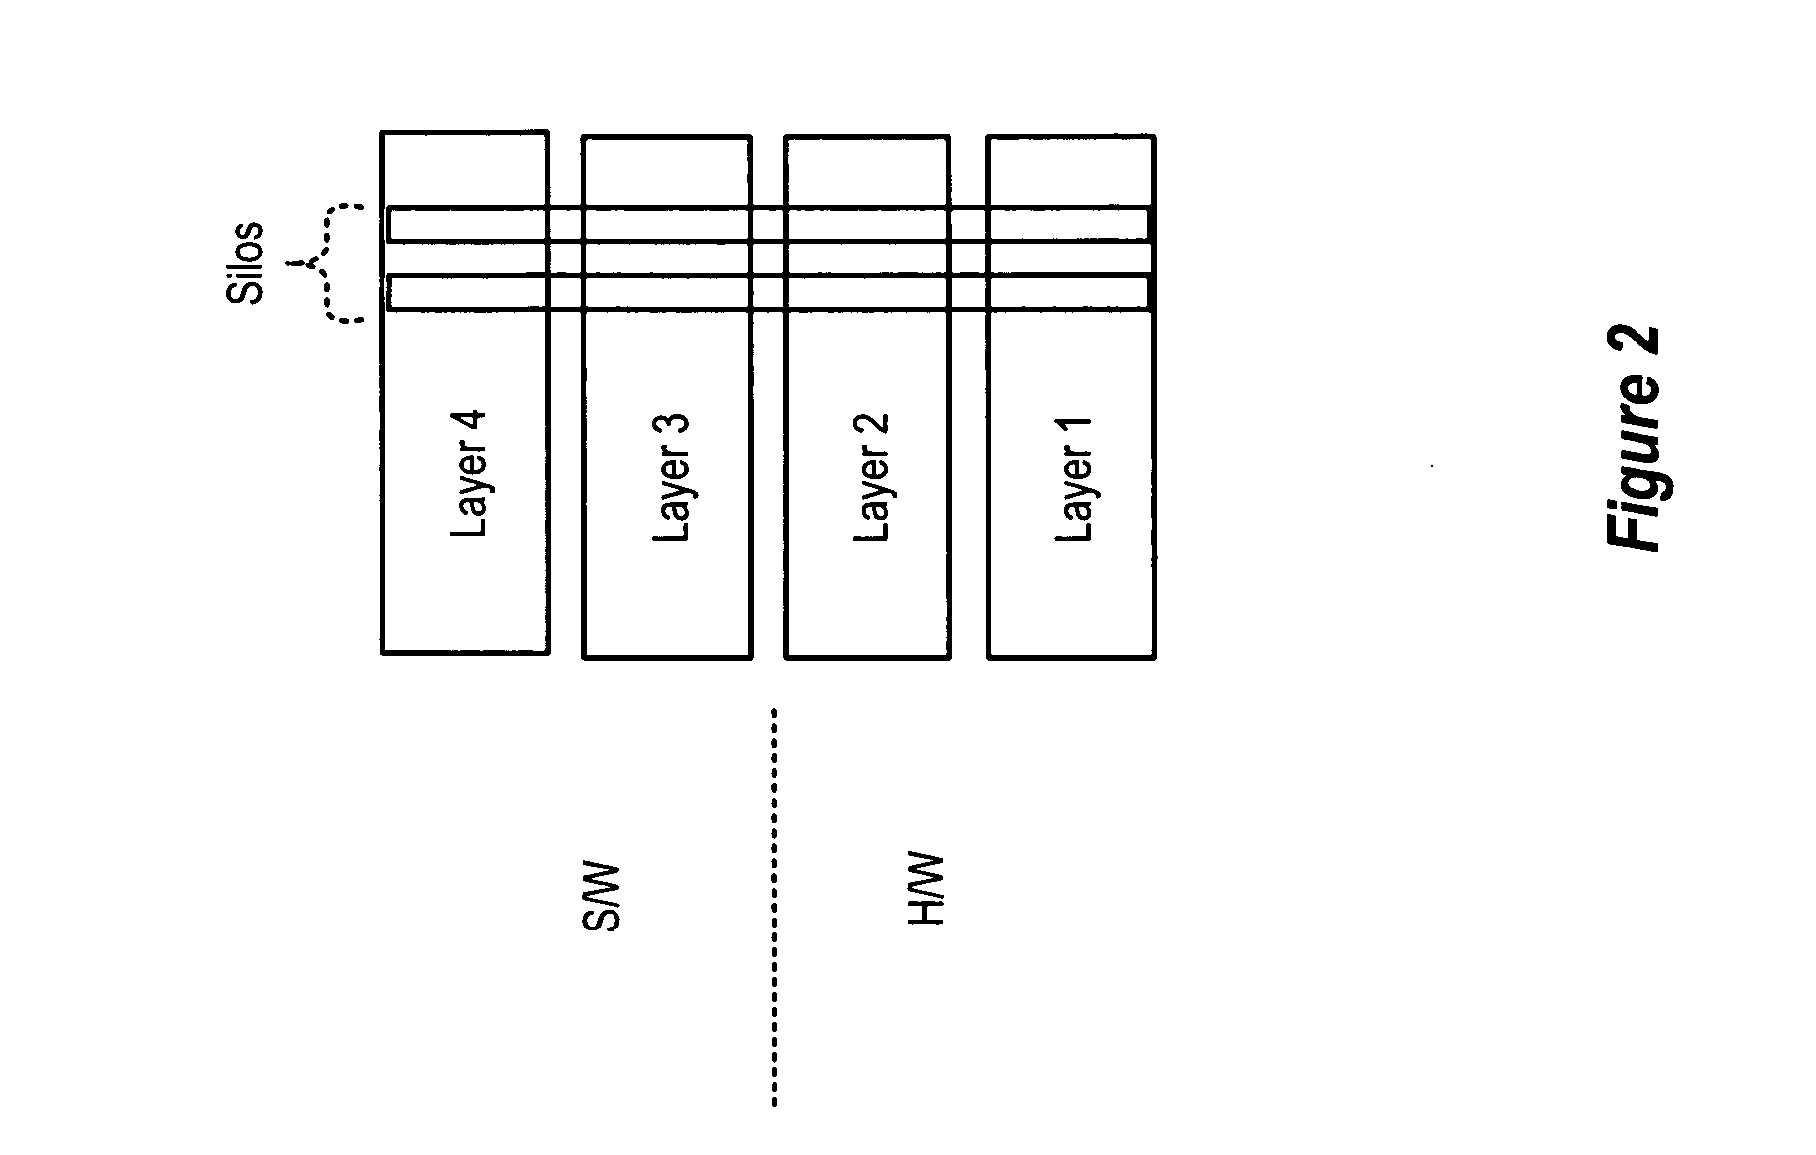 Asymmetrical processing for networking functions and data path offload